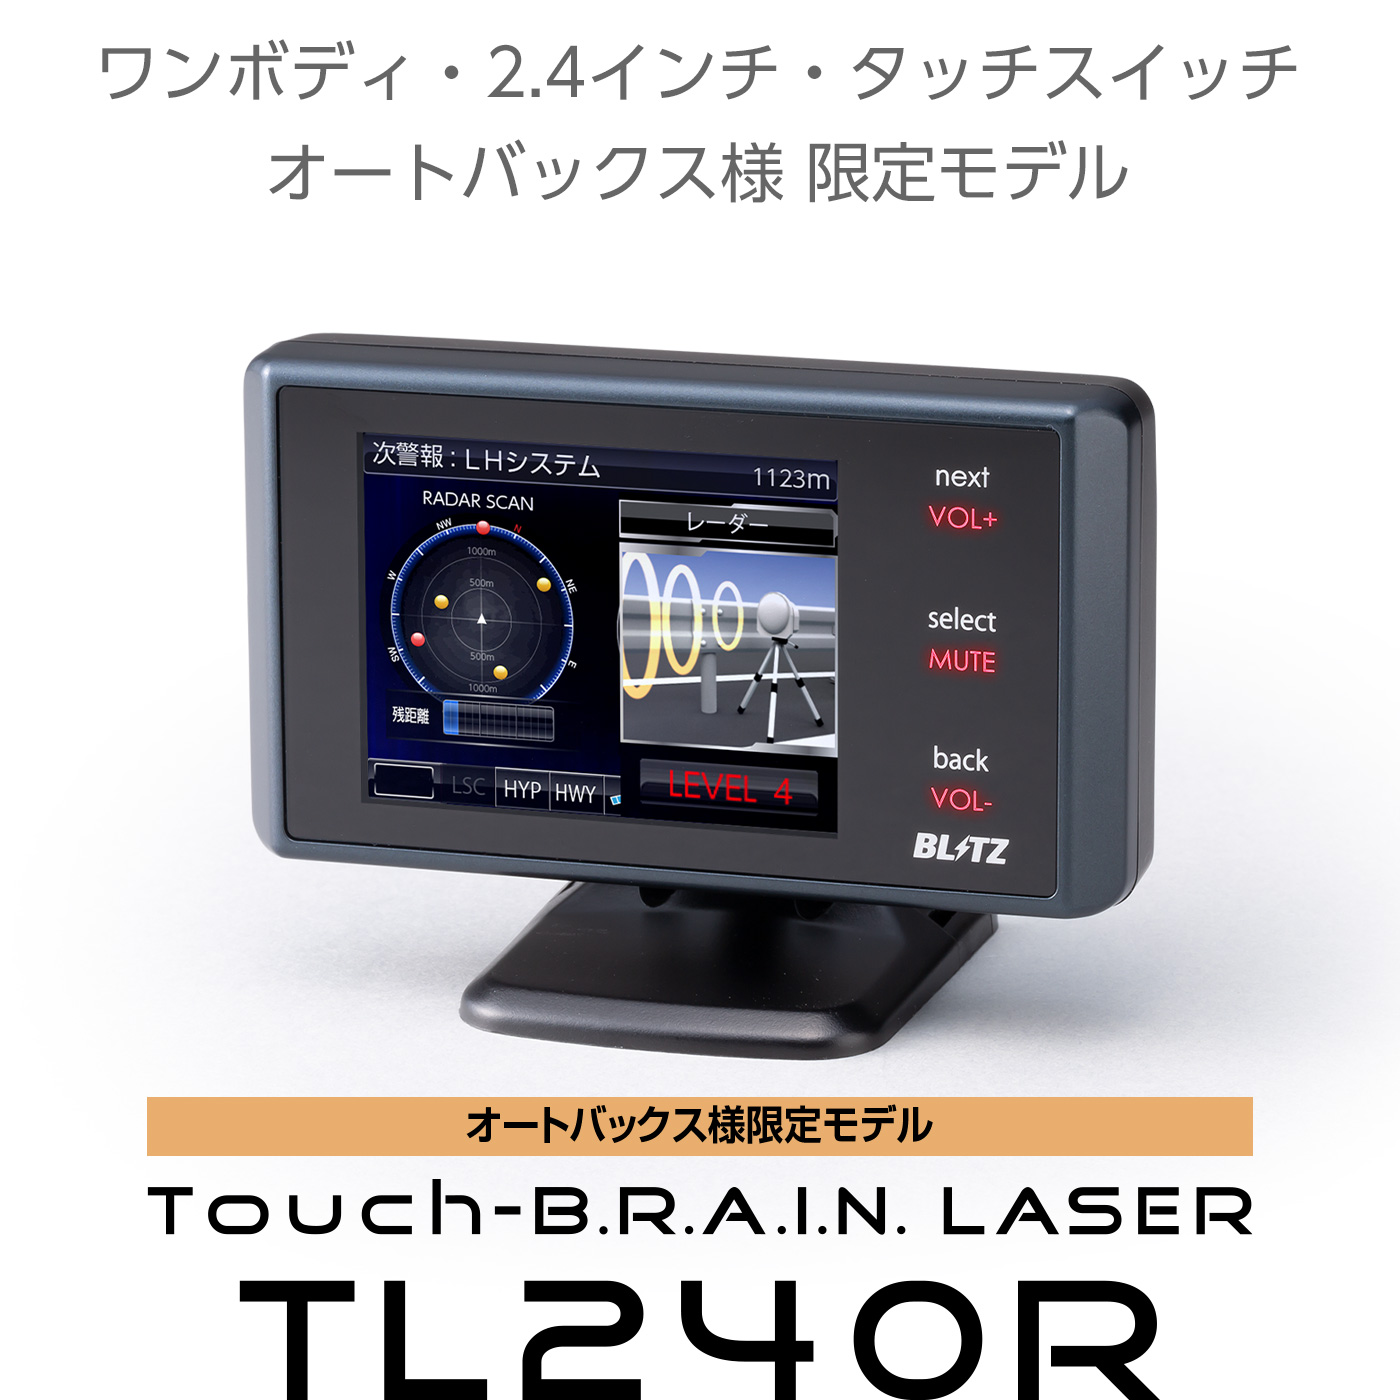 Touch-B.R.A.I.N. LASER トップ | BLITZ